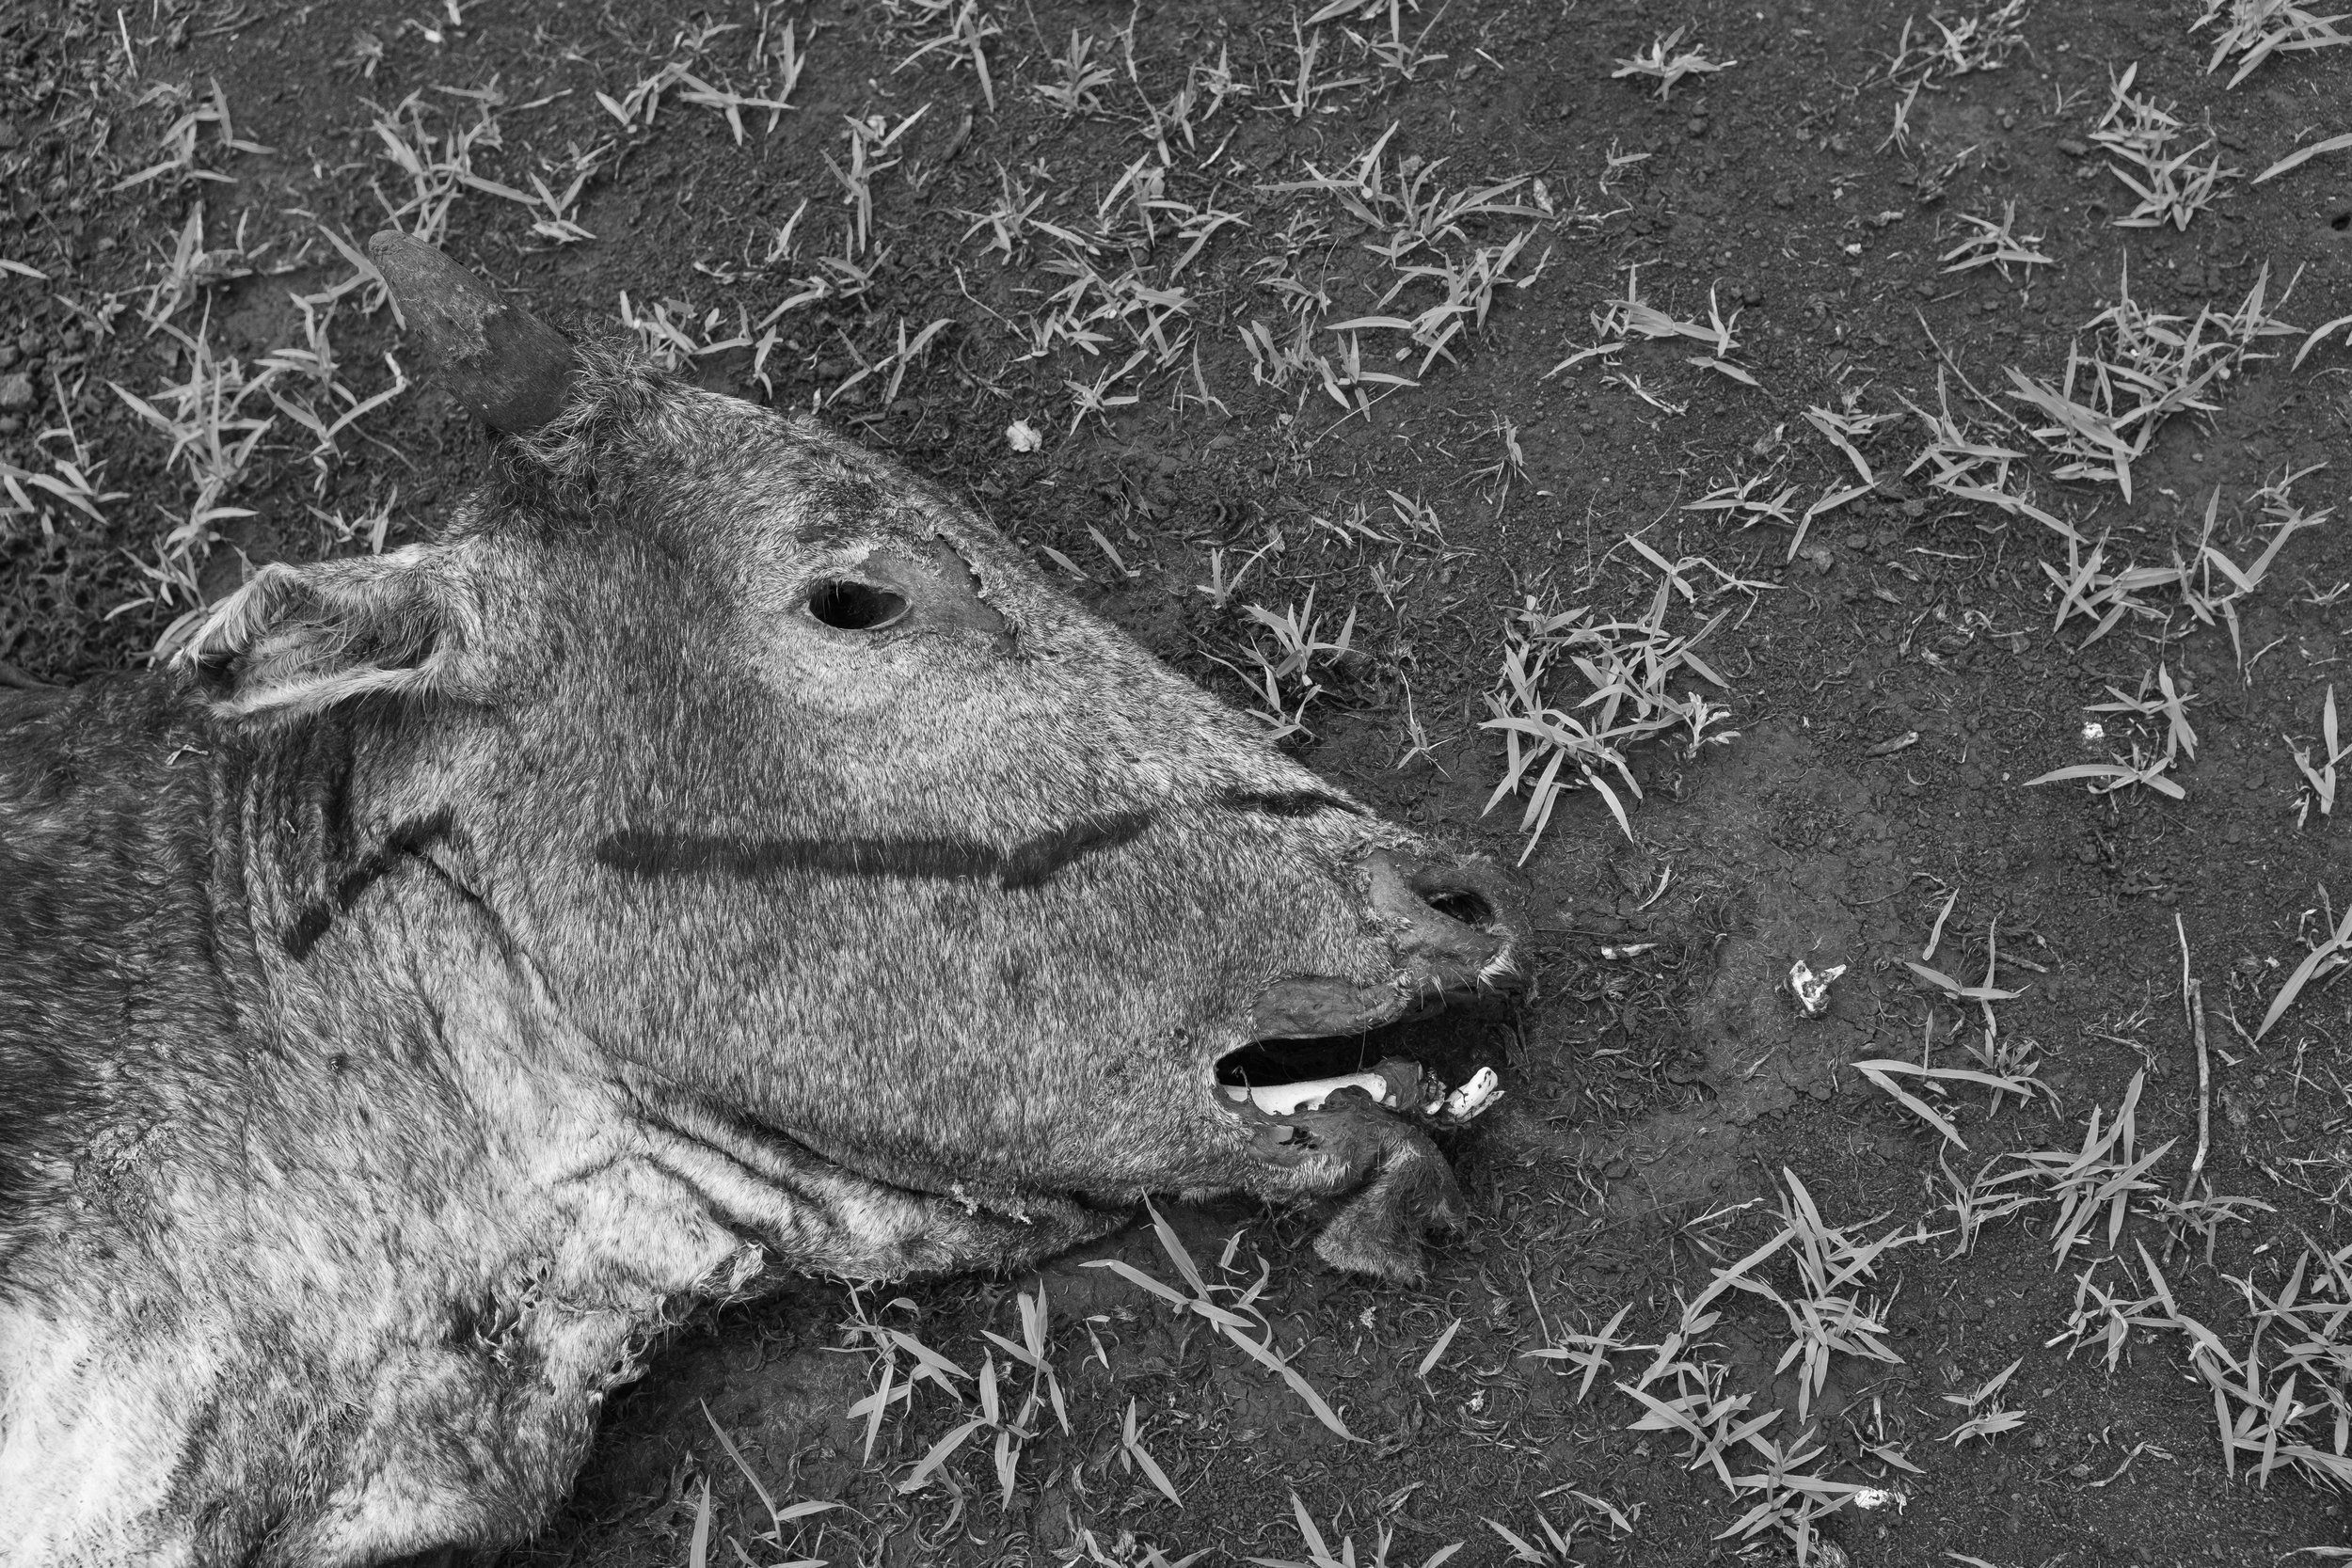  A dead Samburu cow. Due to long drought, cows grow weaker and are unable to cope with sudden bouts of rain and cold weather. Even with the newly available grass, they die in increasingly significant numbers every year as the dry seasons turns into l